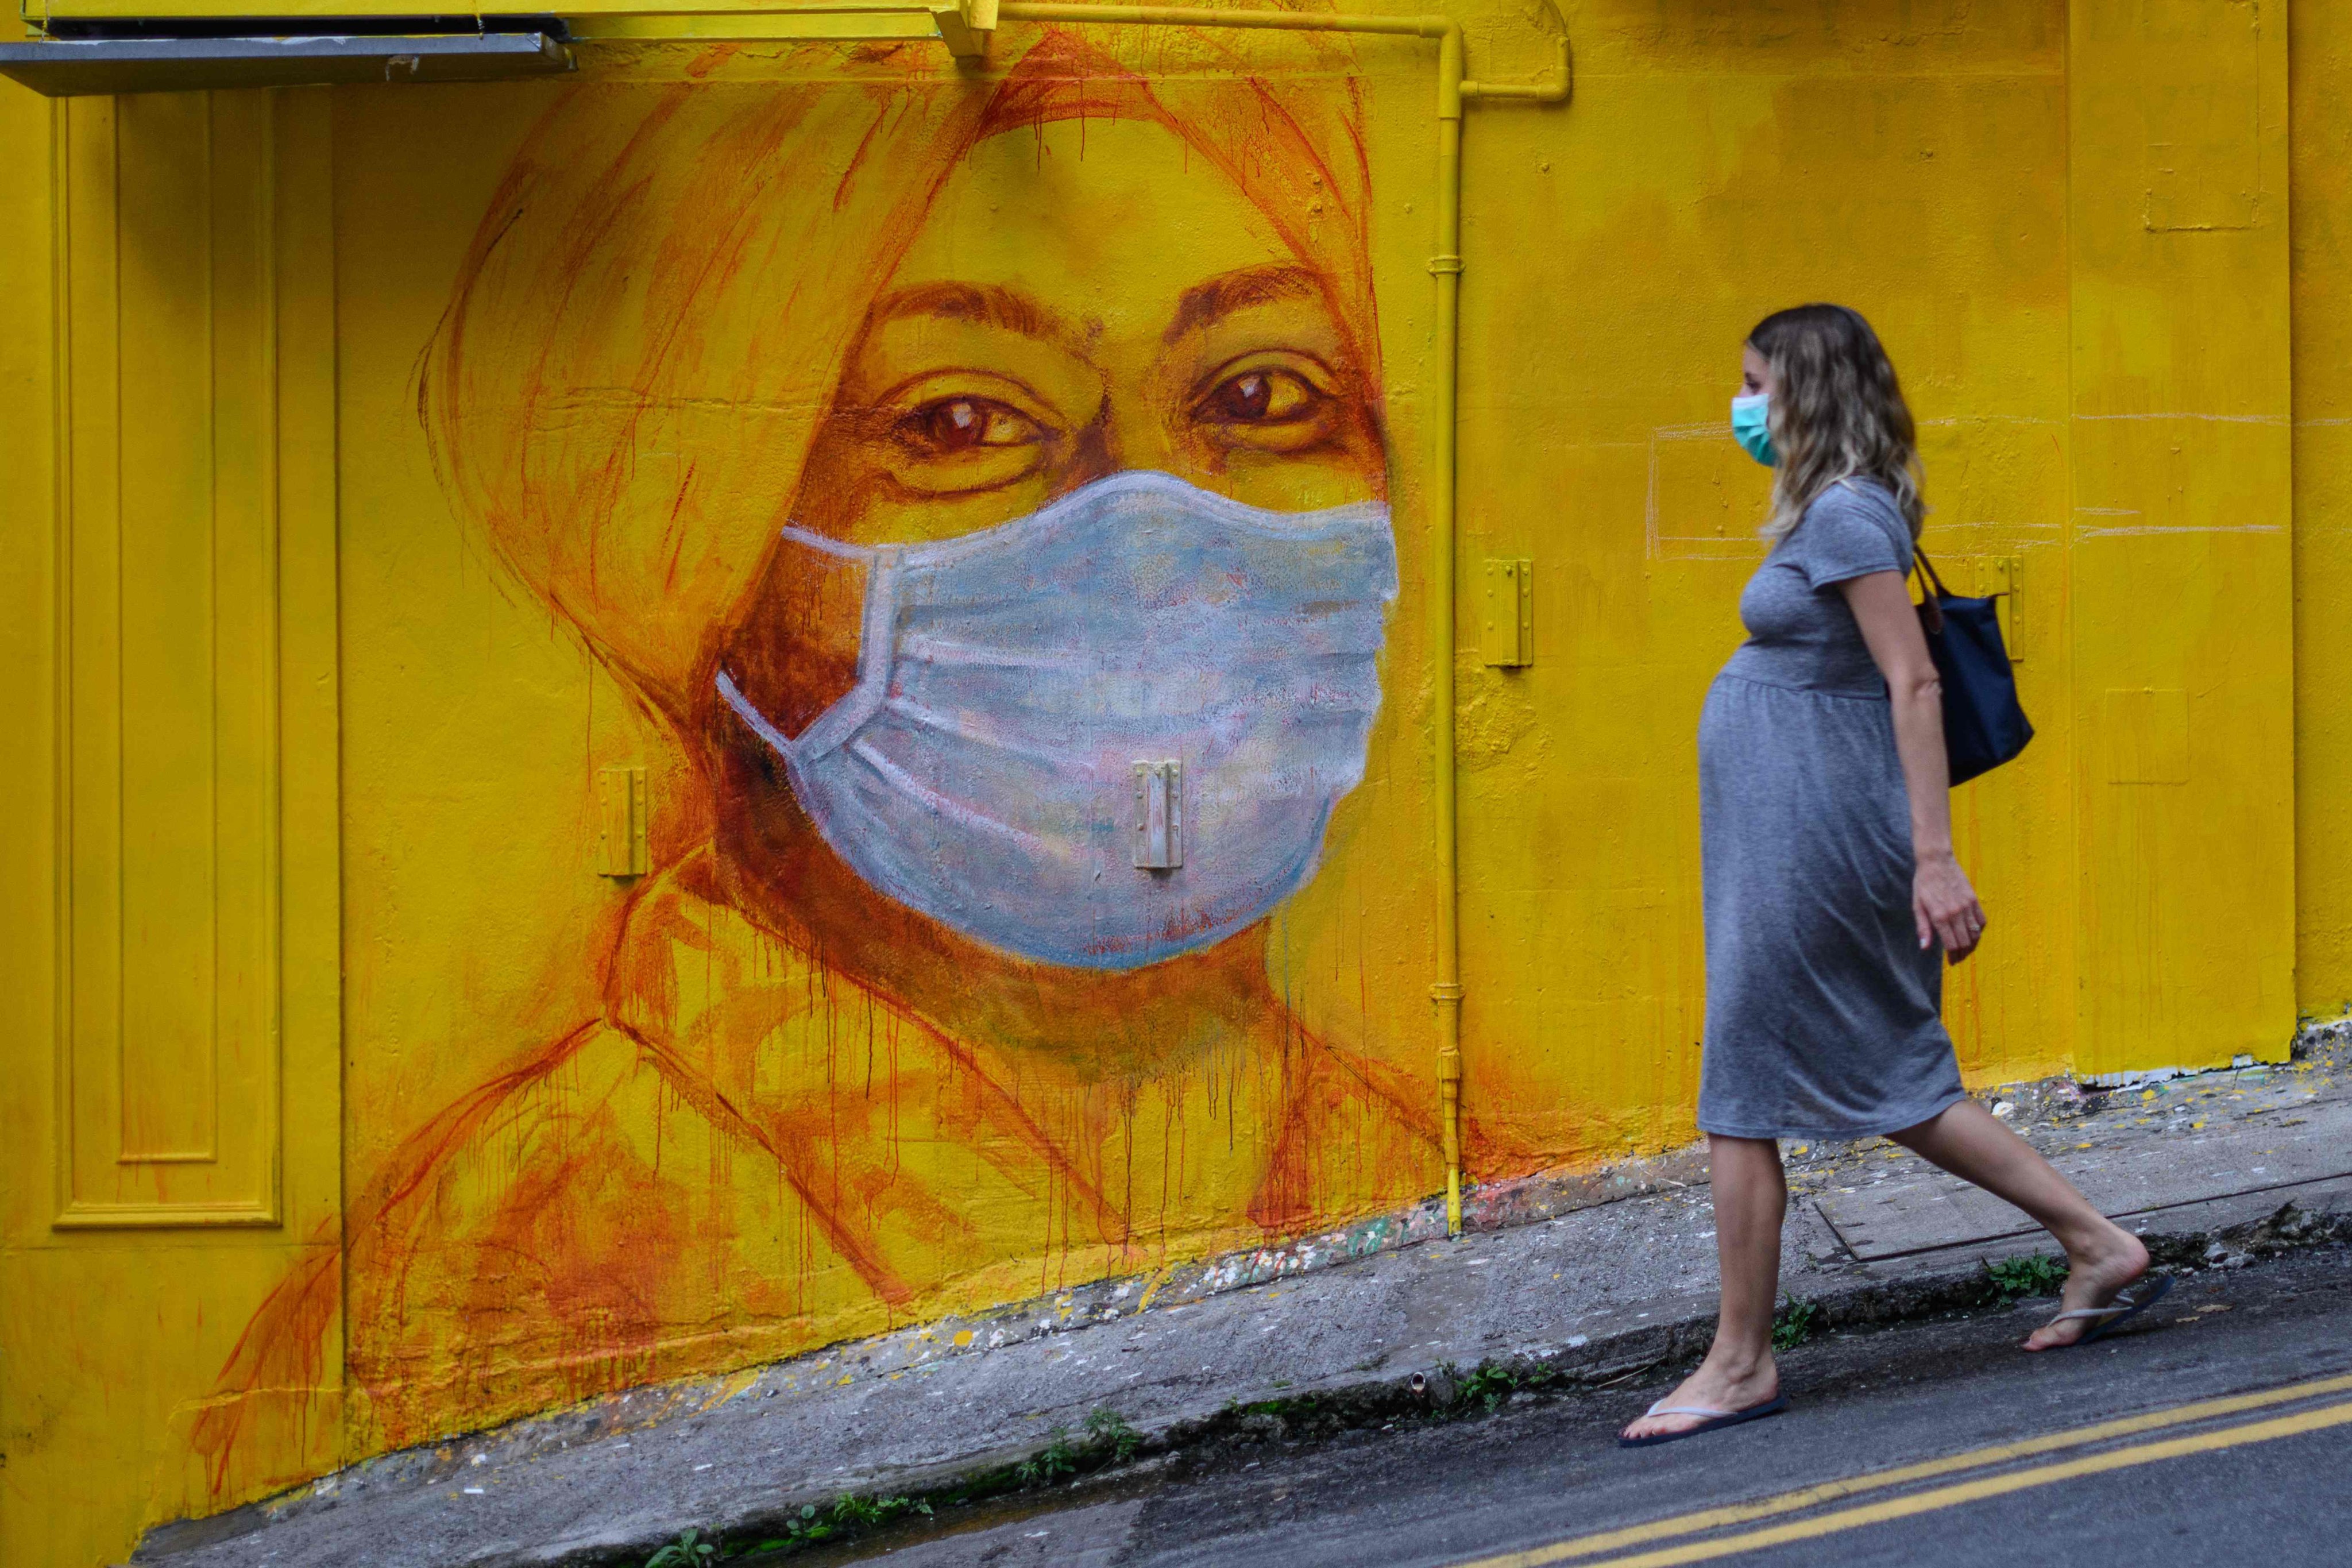 Health emergencies such as Ebola, the Spanish flu and Covid-19 seem to trigger collective amnesia, says expert on emergencies Dr Joanne Liu, who believes countries need to present a united front. Photo: AFP